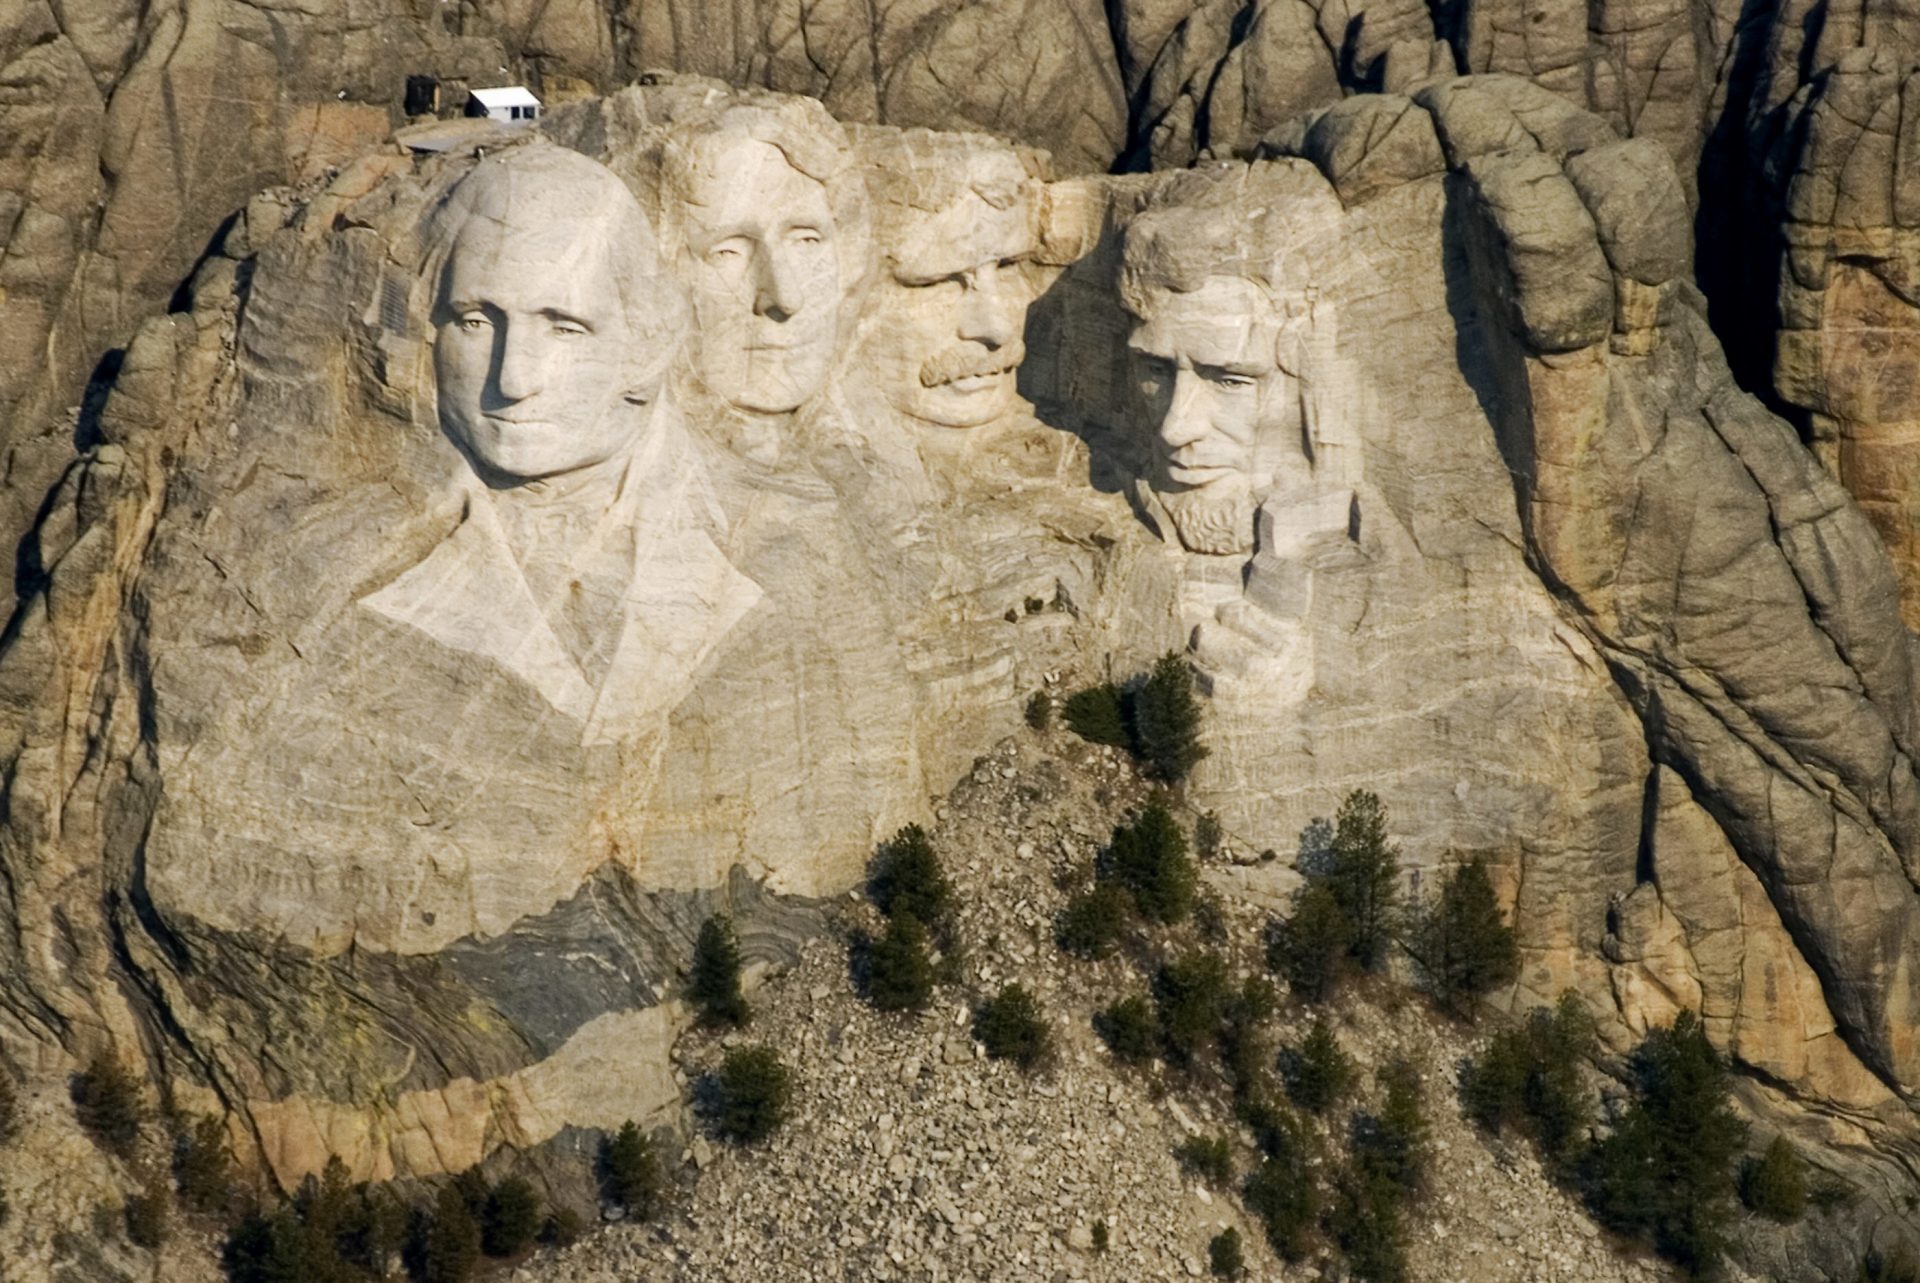 FILE PHOTO: This April 22, 2008 file photo shows the Mount Rushmore National Memorial in the Black Hills of South Dakota.